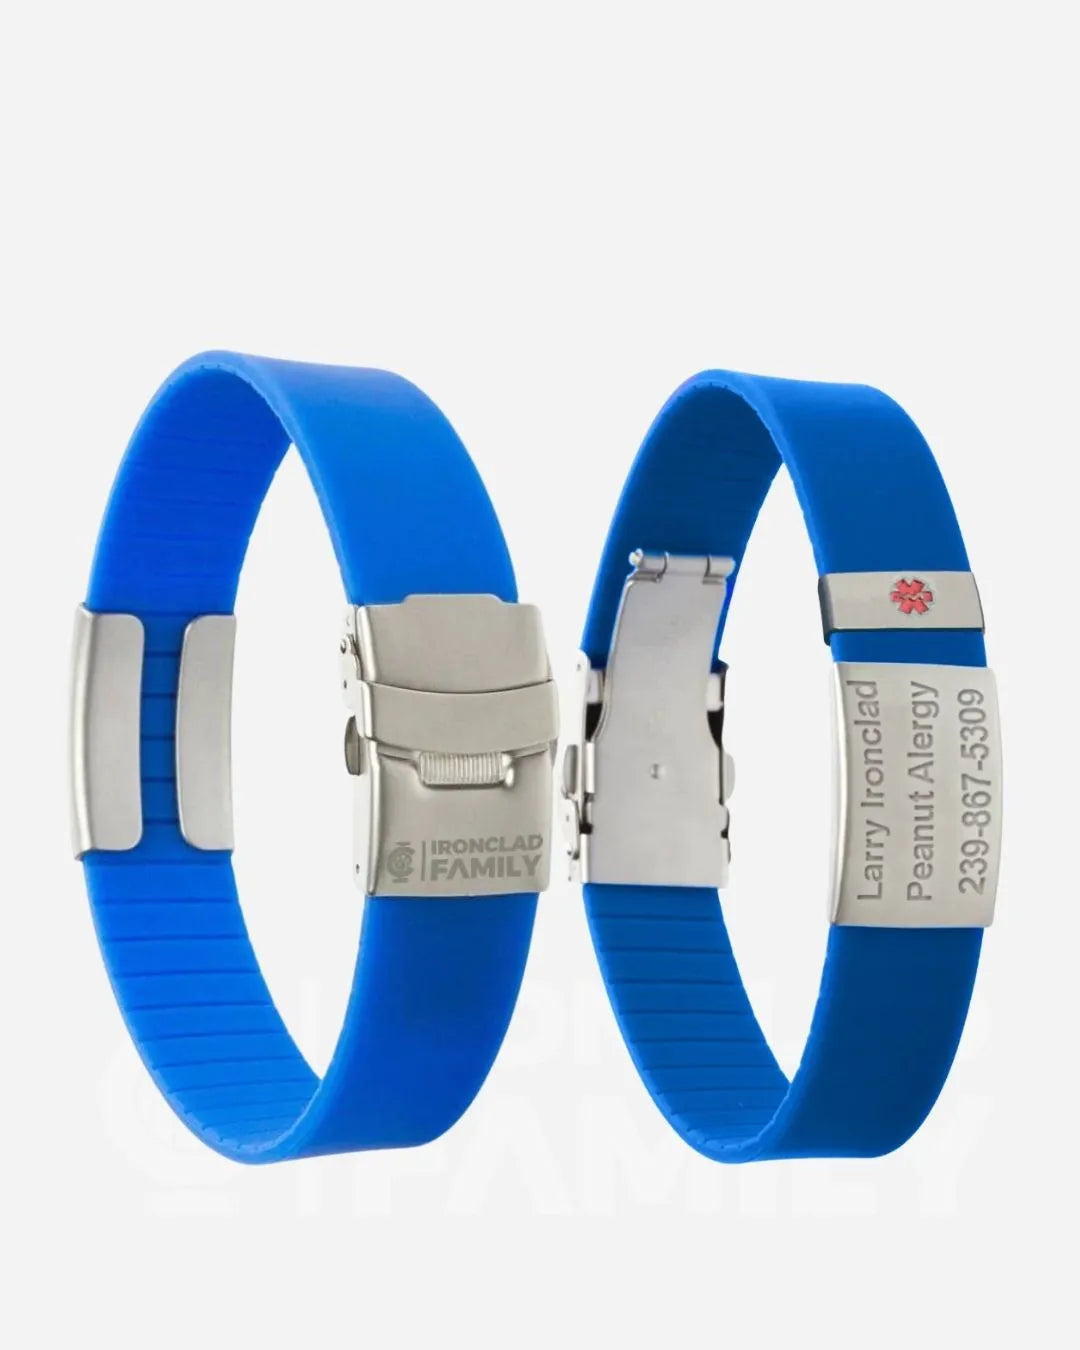 Pair of blue silicone hospital wristbands with silver fastening